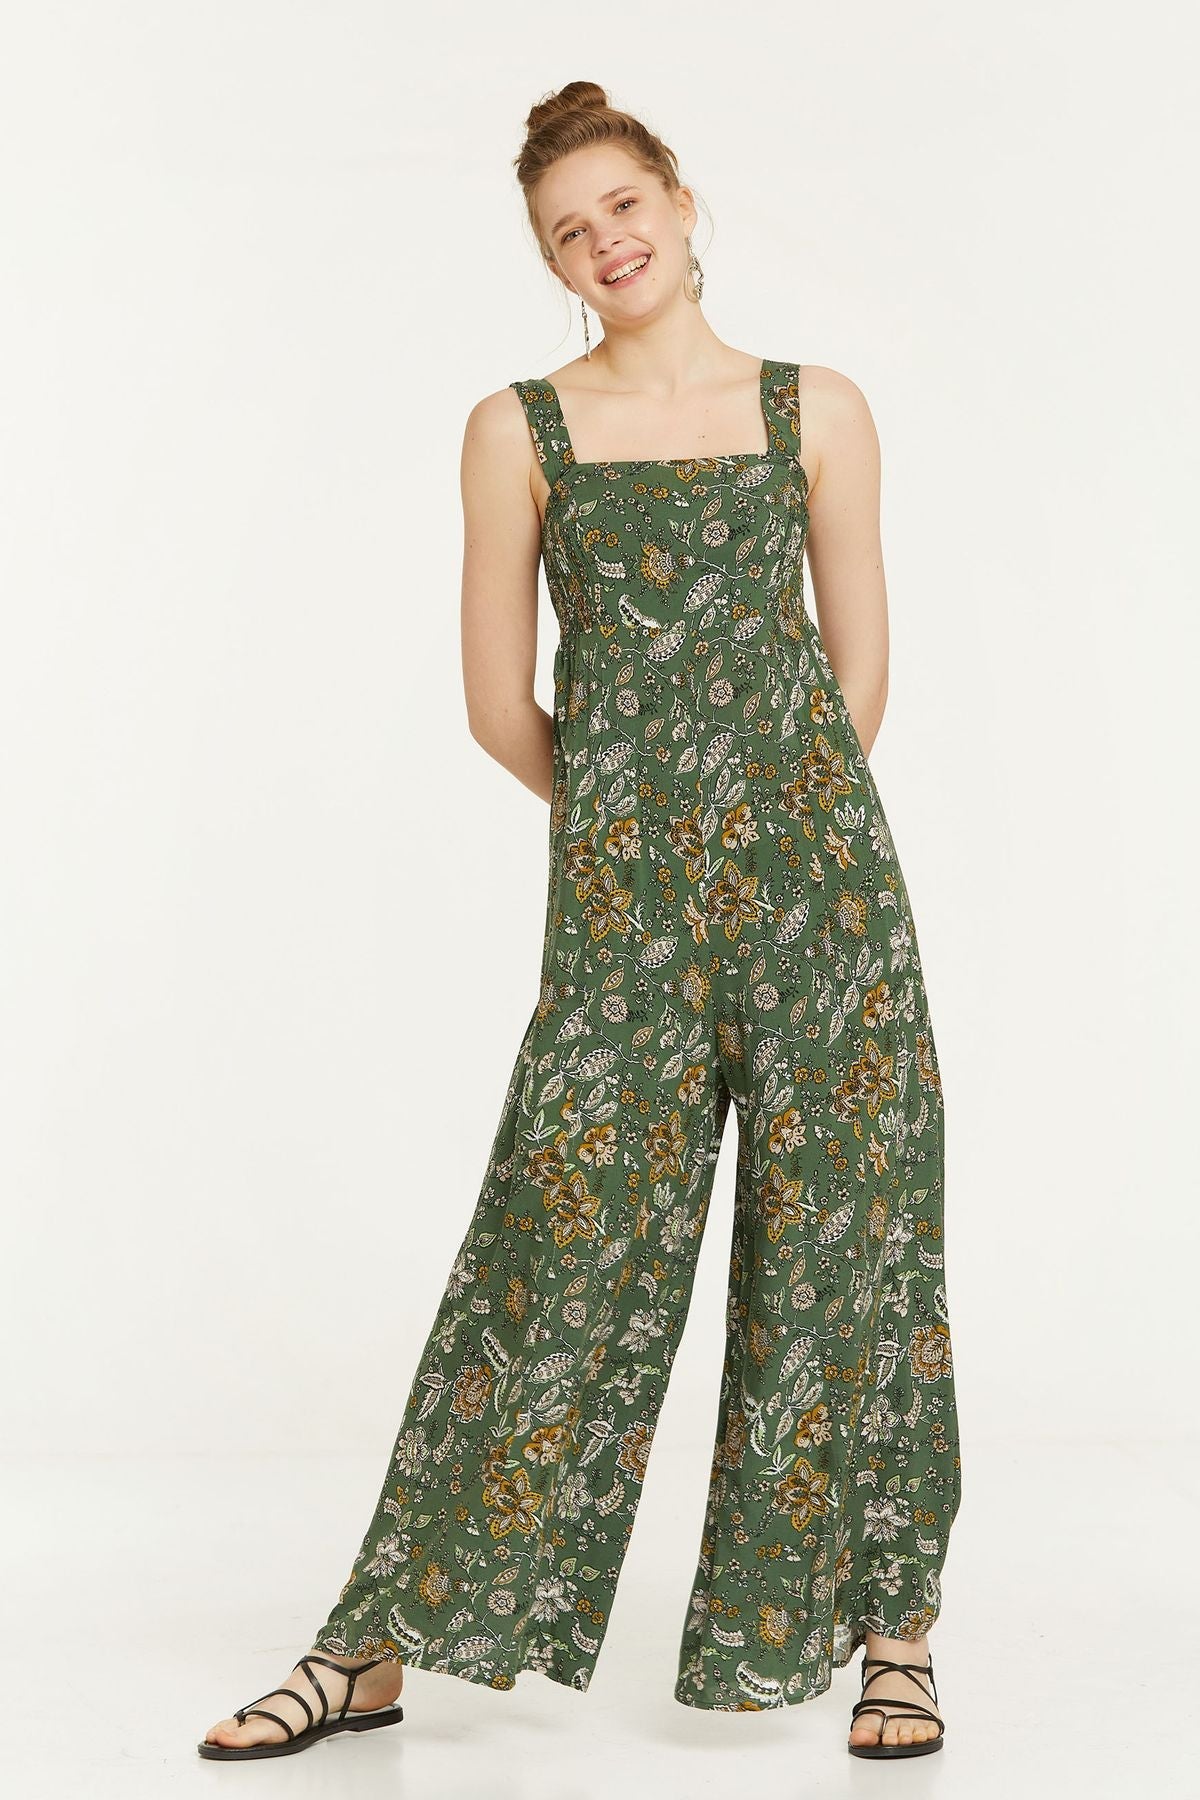 Flower Print Flowy Jumpsuit with Square Neck Green